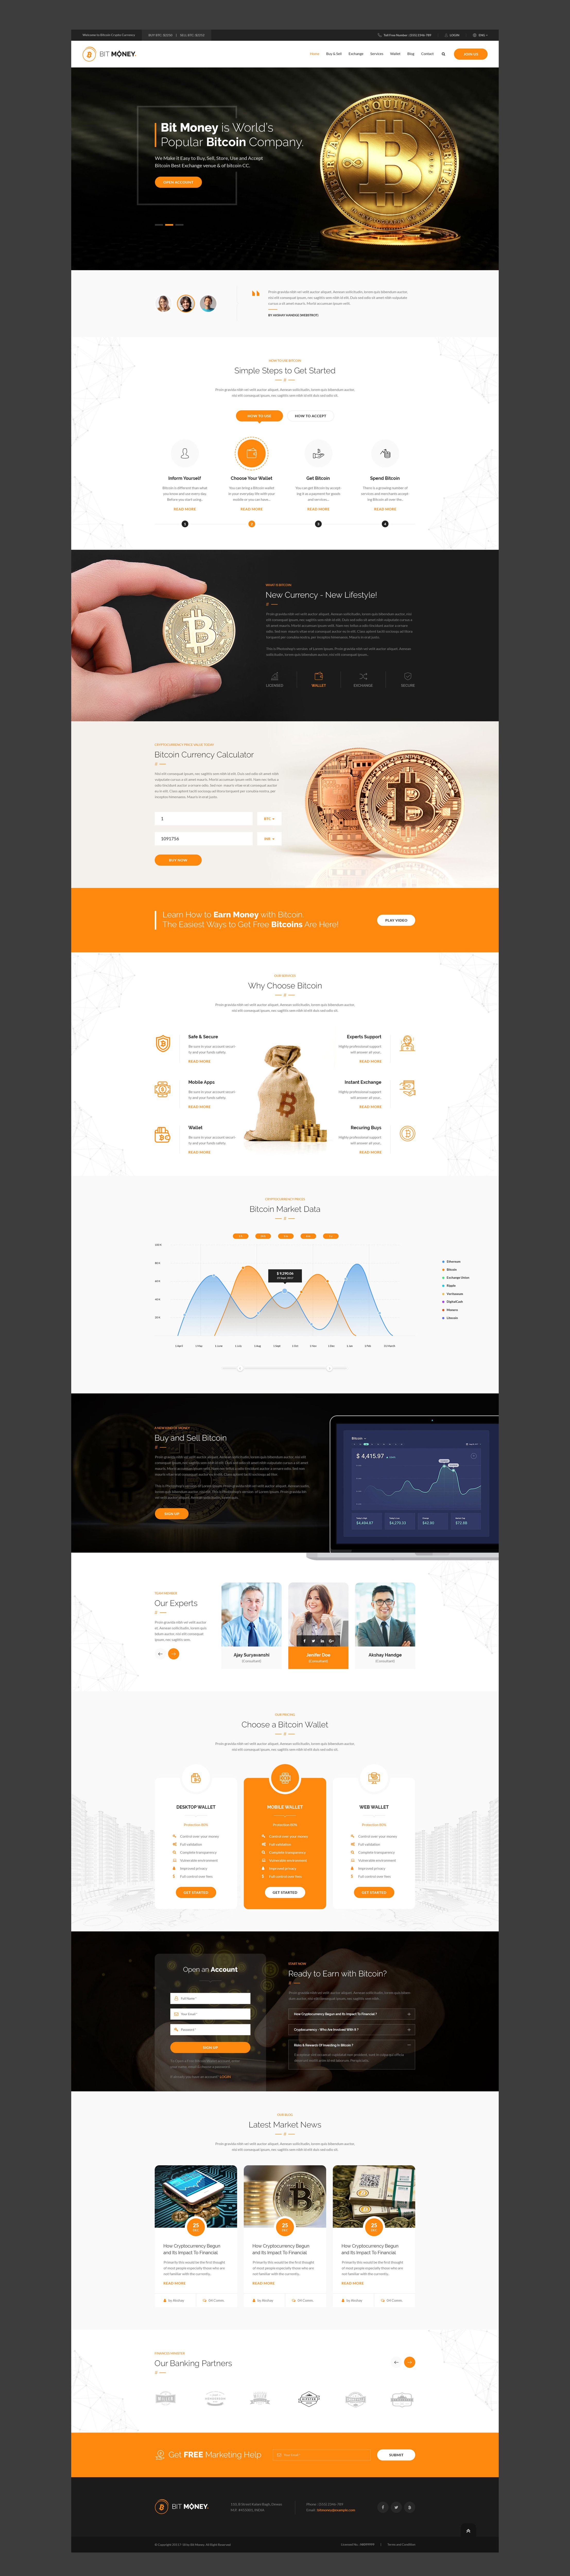 Bit Munt - Bitcoin Crypto Currency Landing Page Template ...